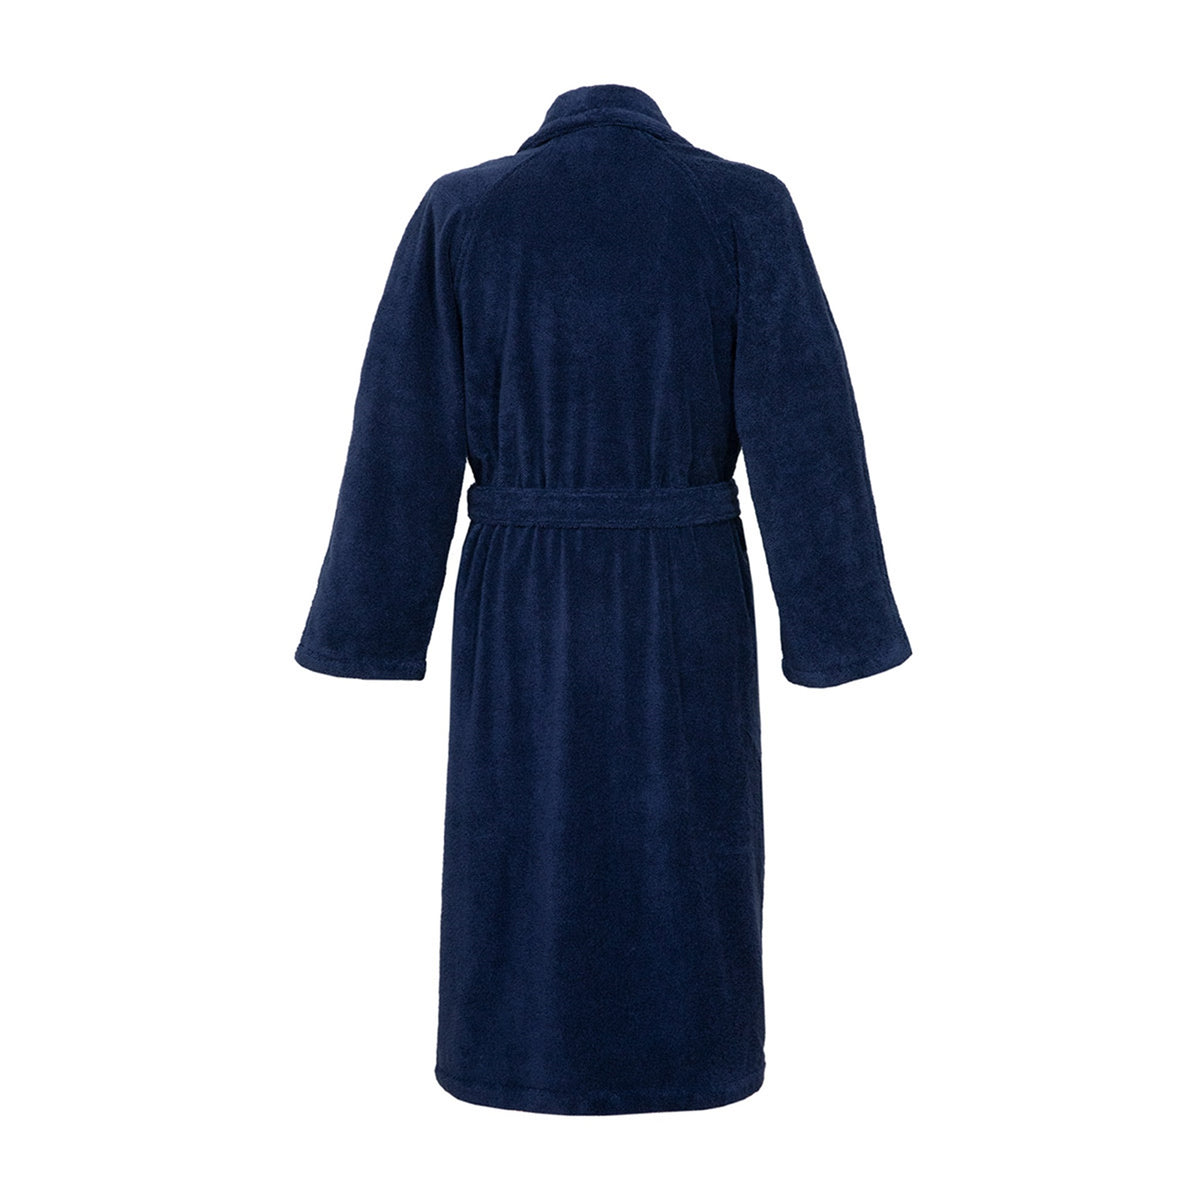 Back View of Yves Delorme Etoile Bath Robe in Color Marine